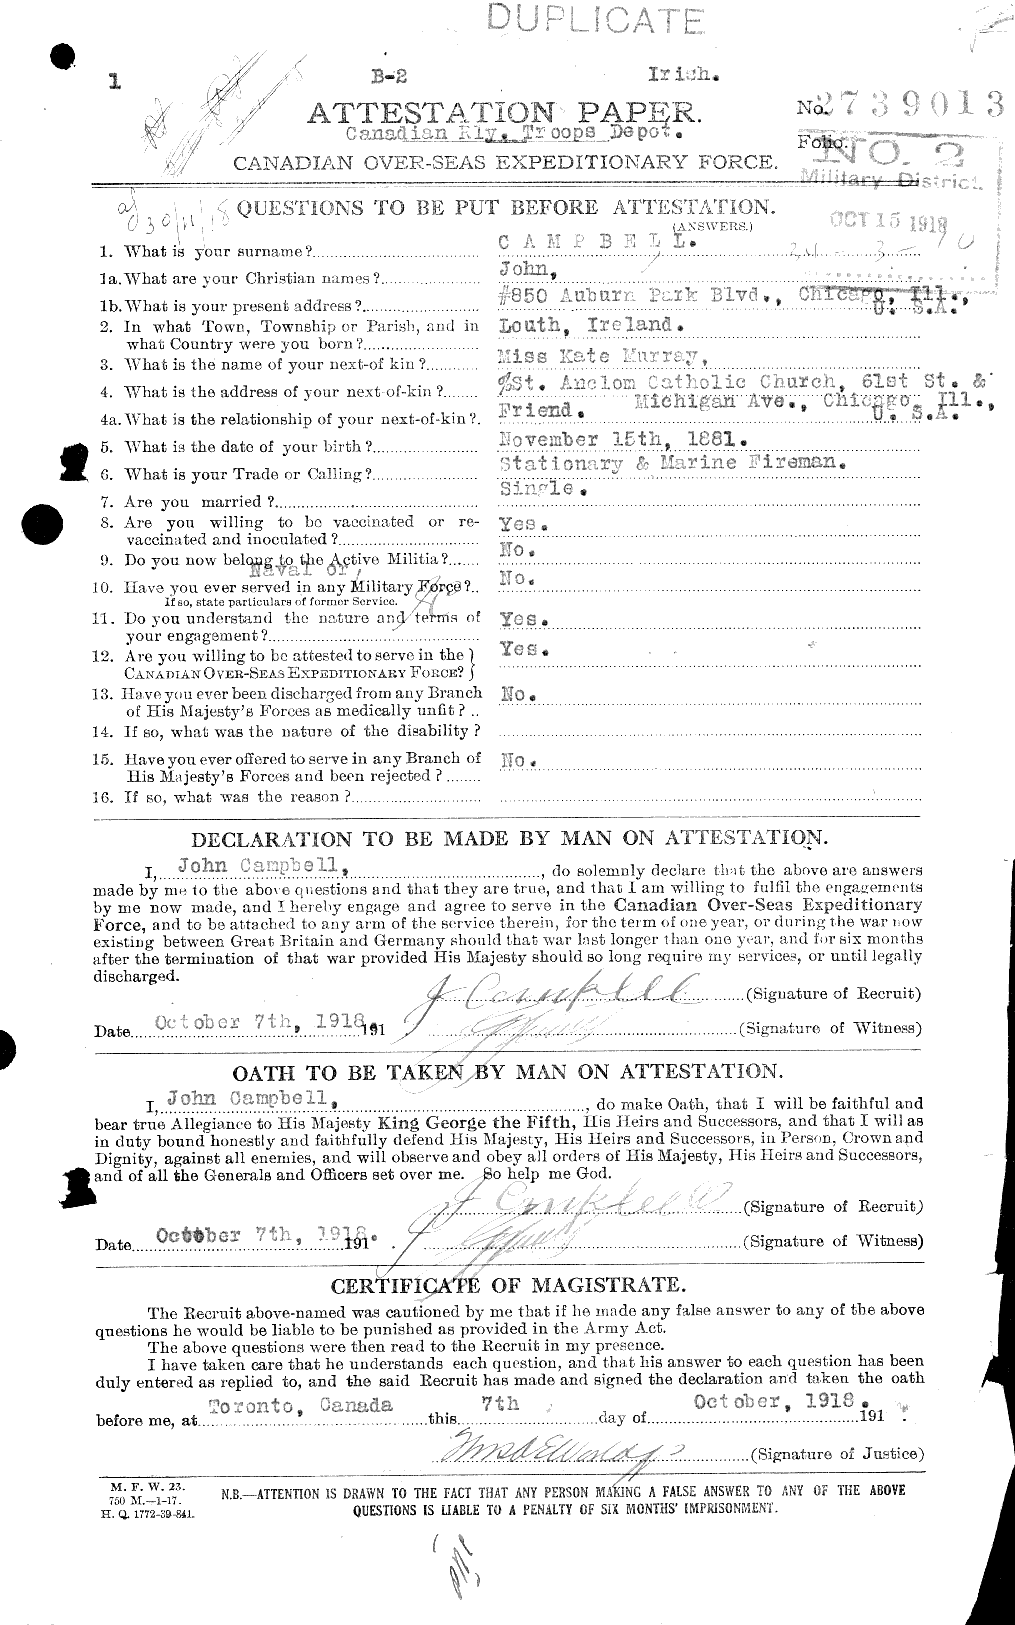 Personnel Records of the First World War - CEF 008488a